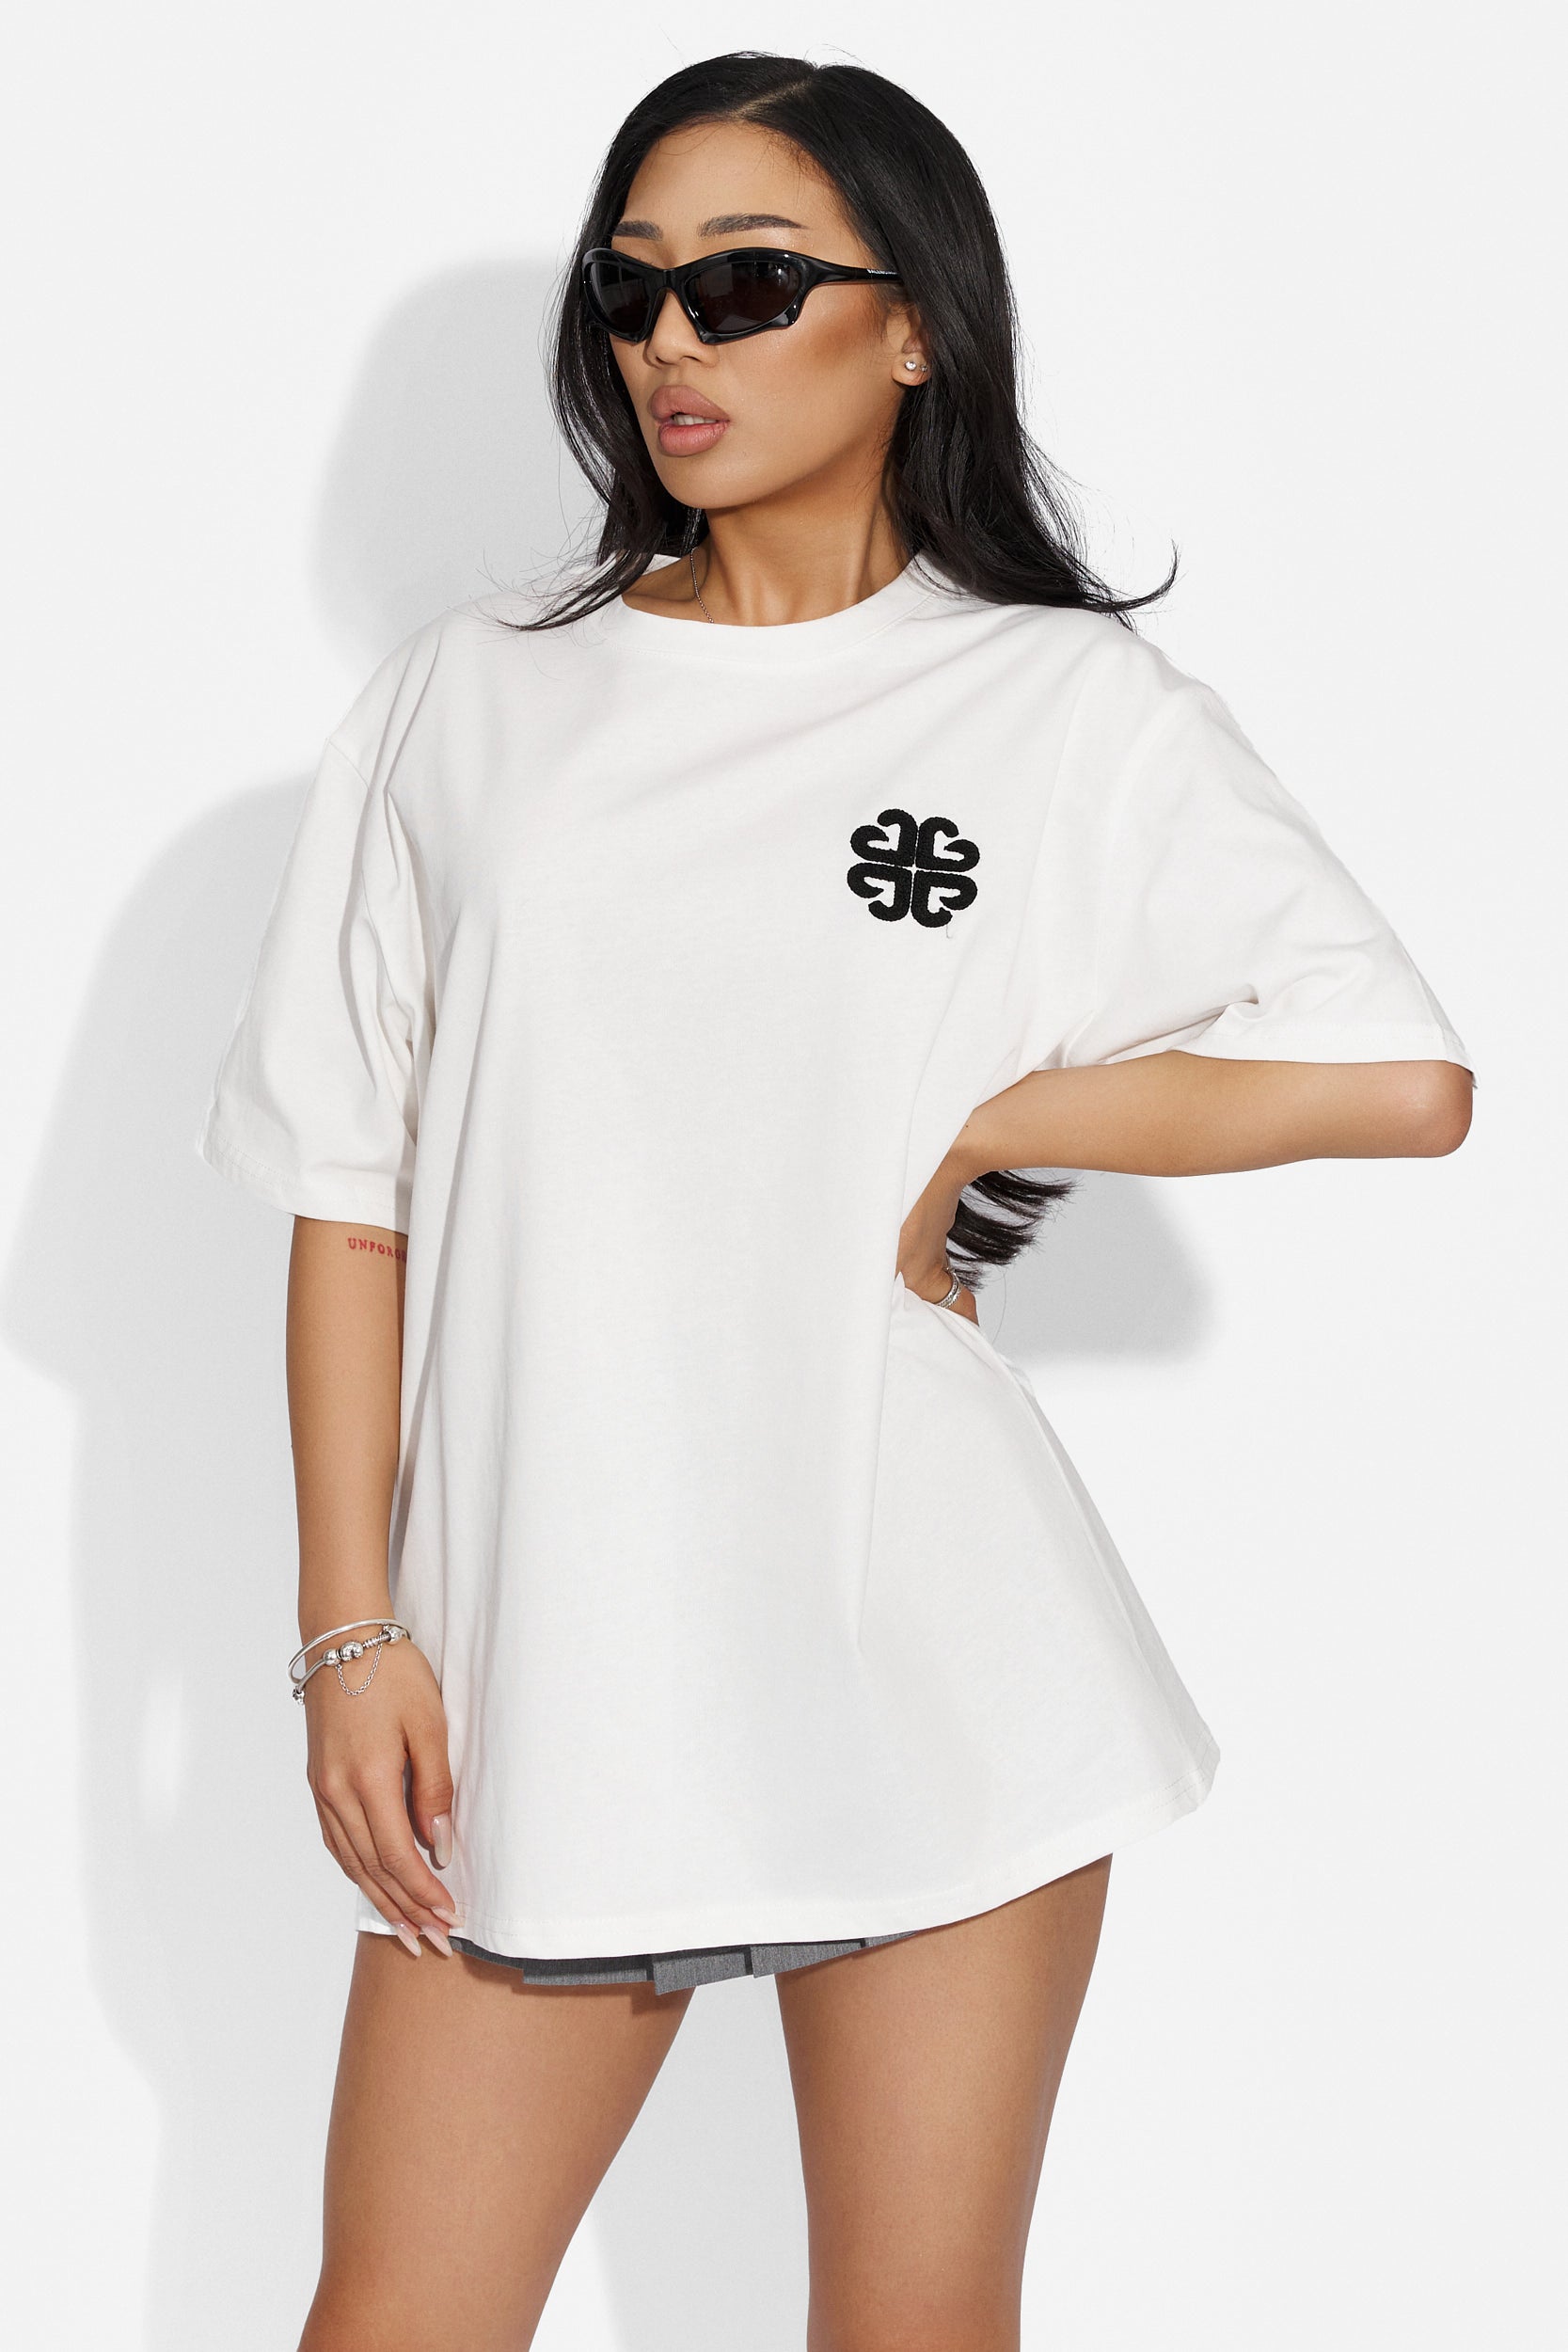 Forlany Bogas casual white ladies shirt